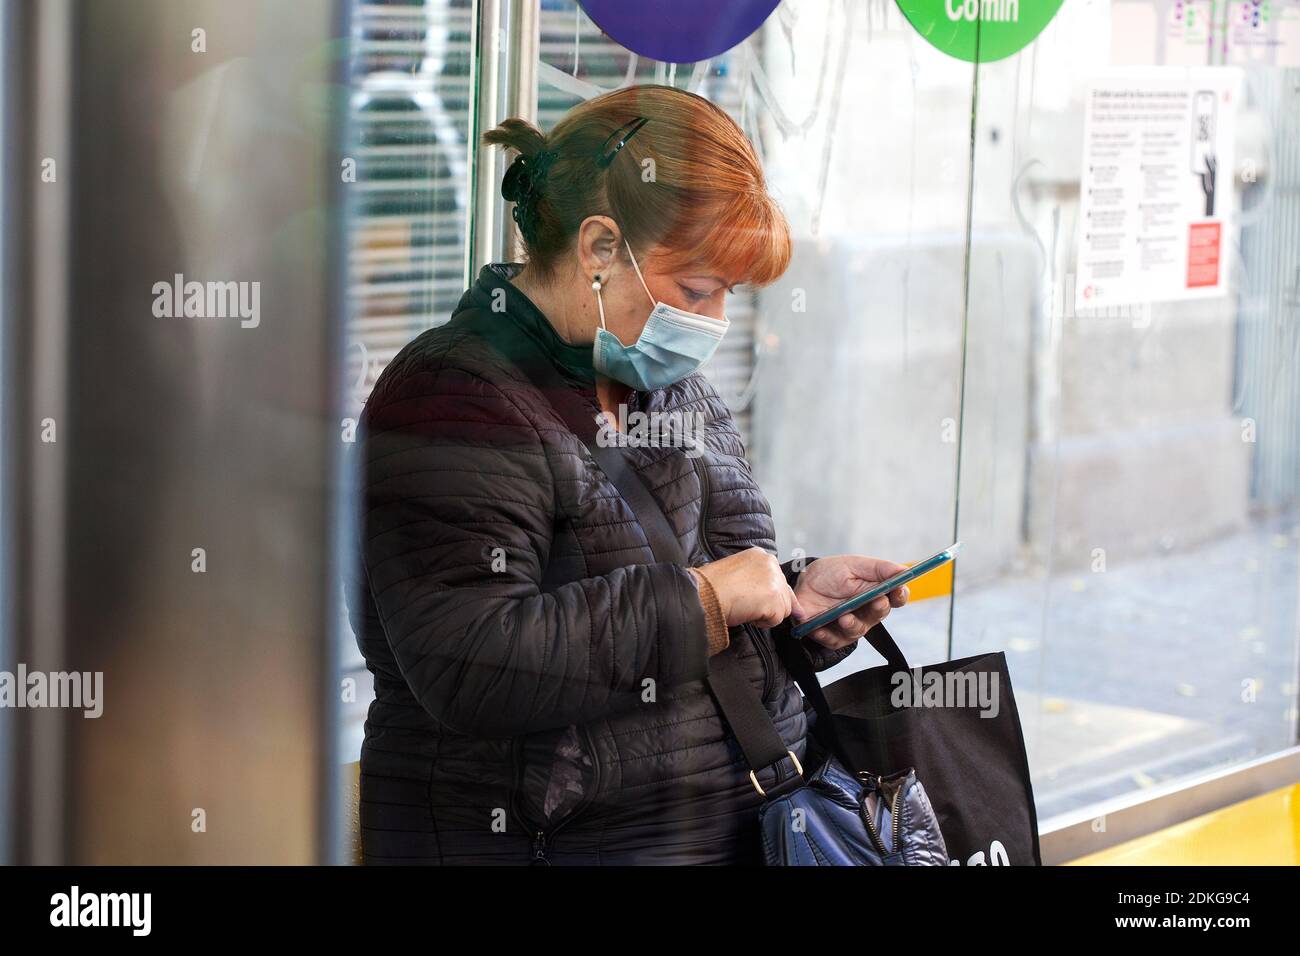 Woman at bus stop using her smartphone, Barcelona. Stock Photo